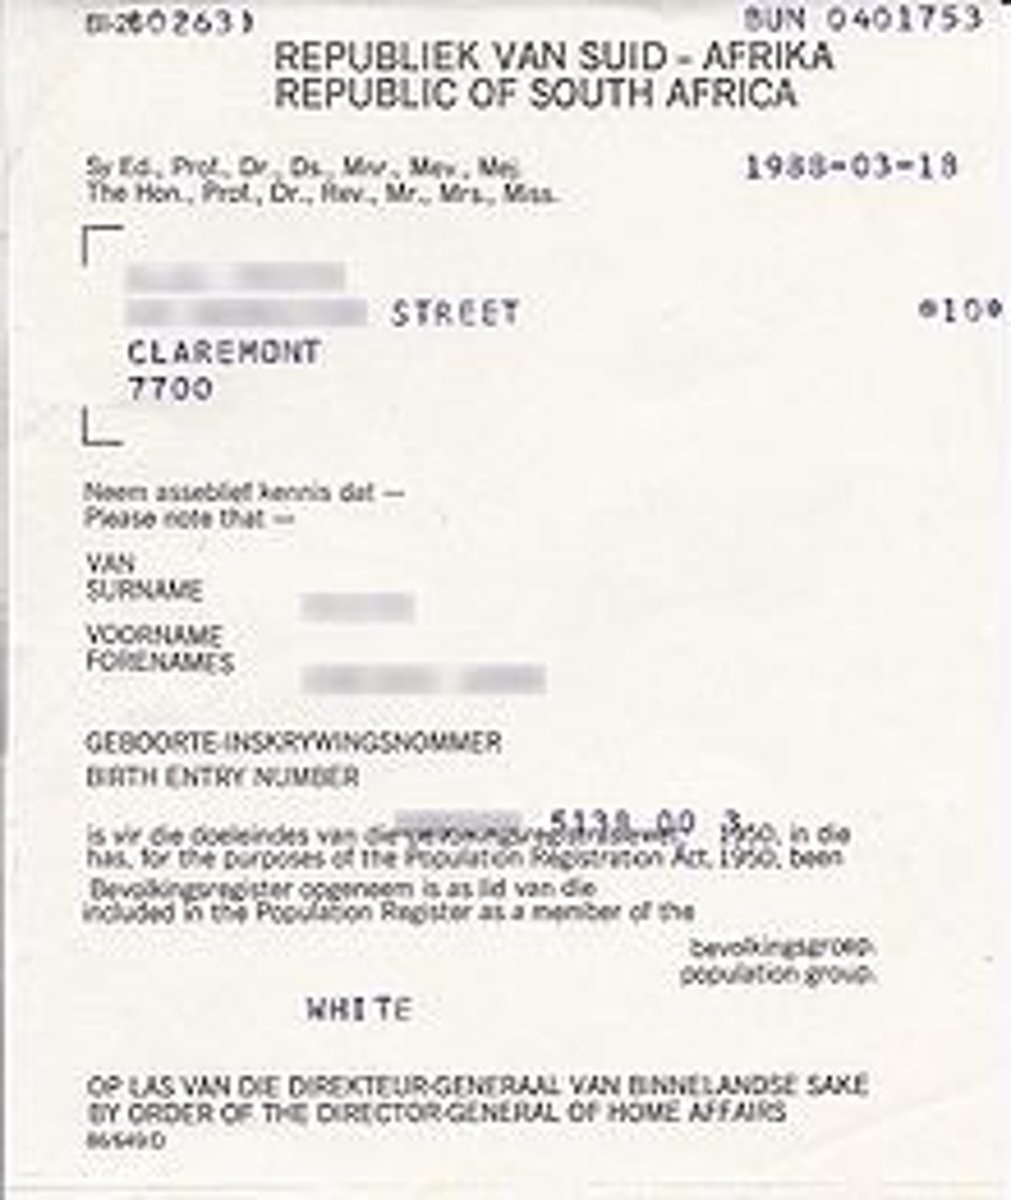 <p>required that each inhabitant of South Africa be classified and registered in accordance with his or her racial characteristics as part of the system of apartheid.</p>